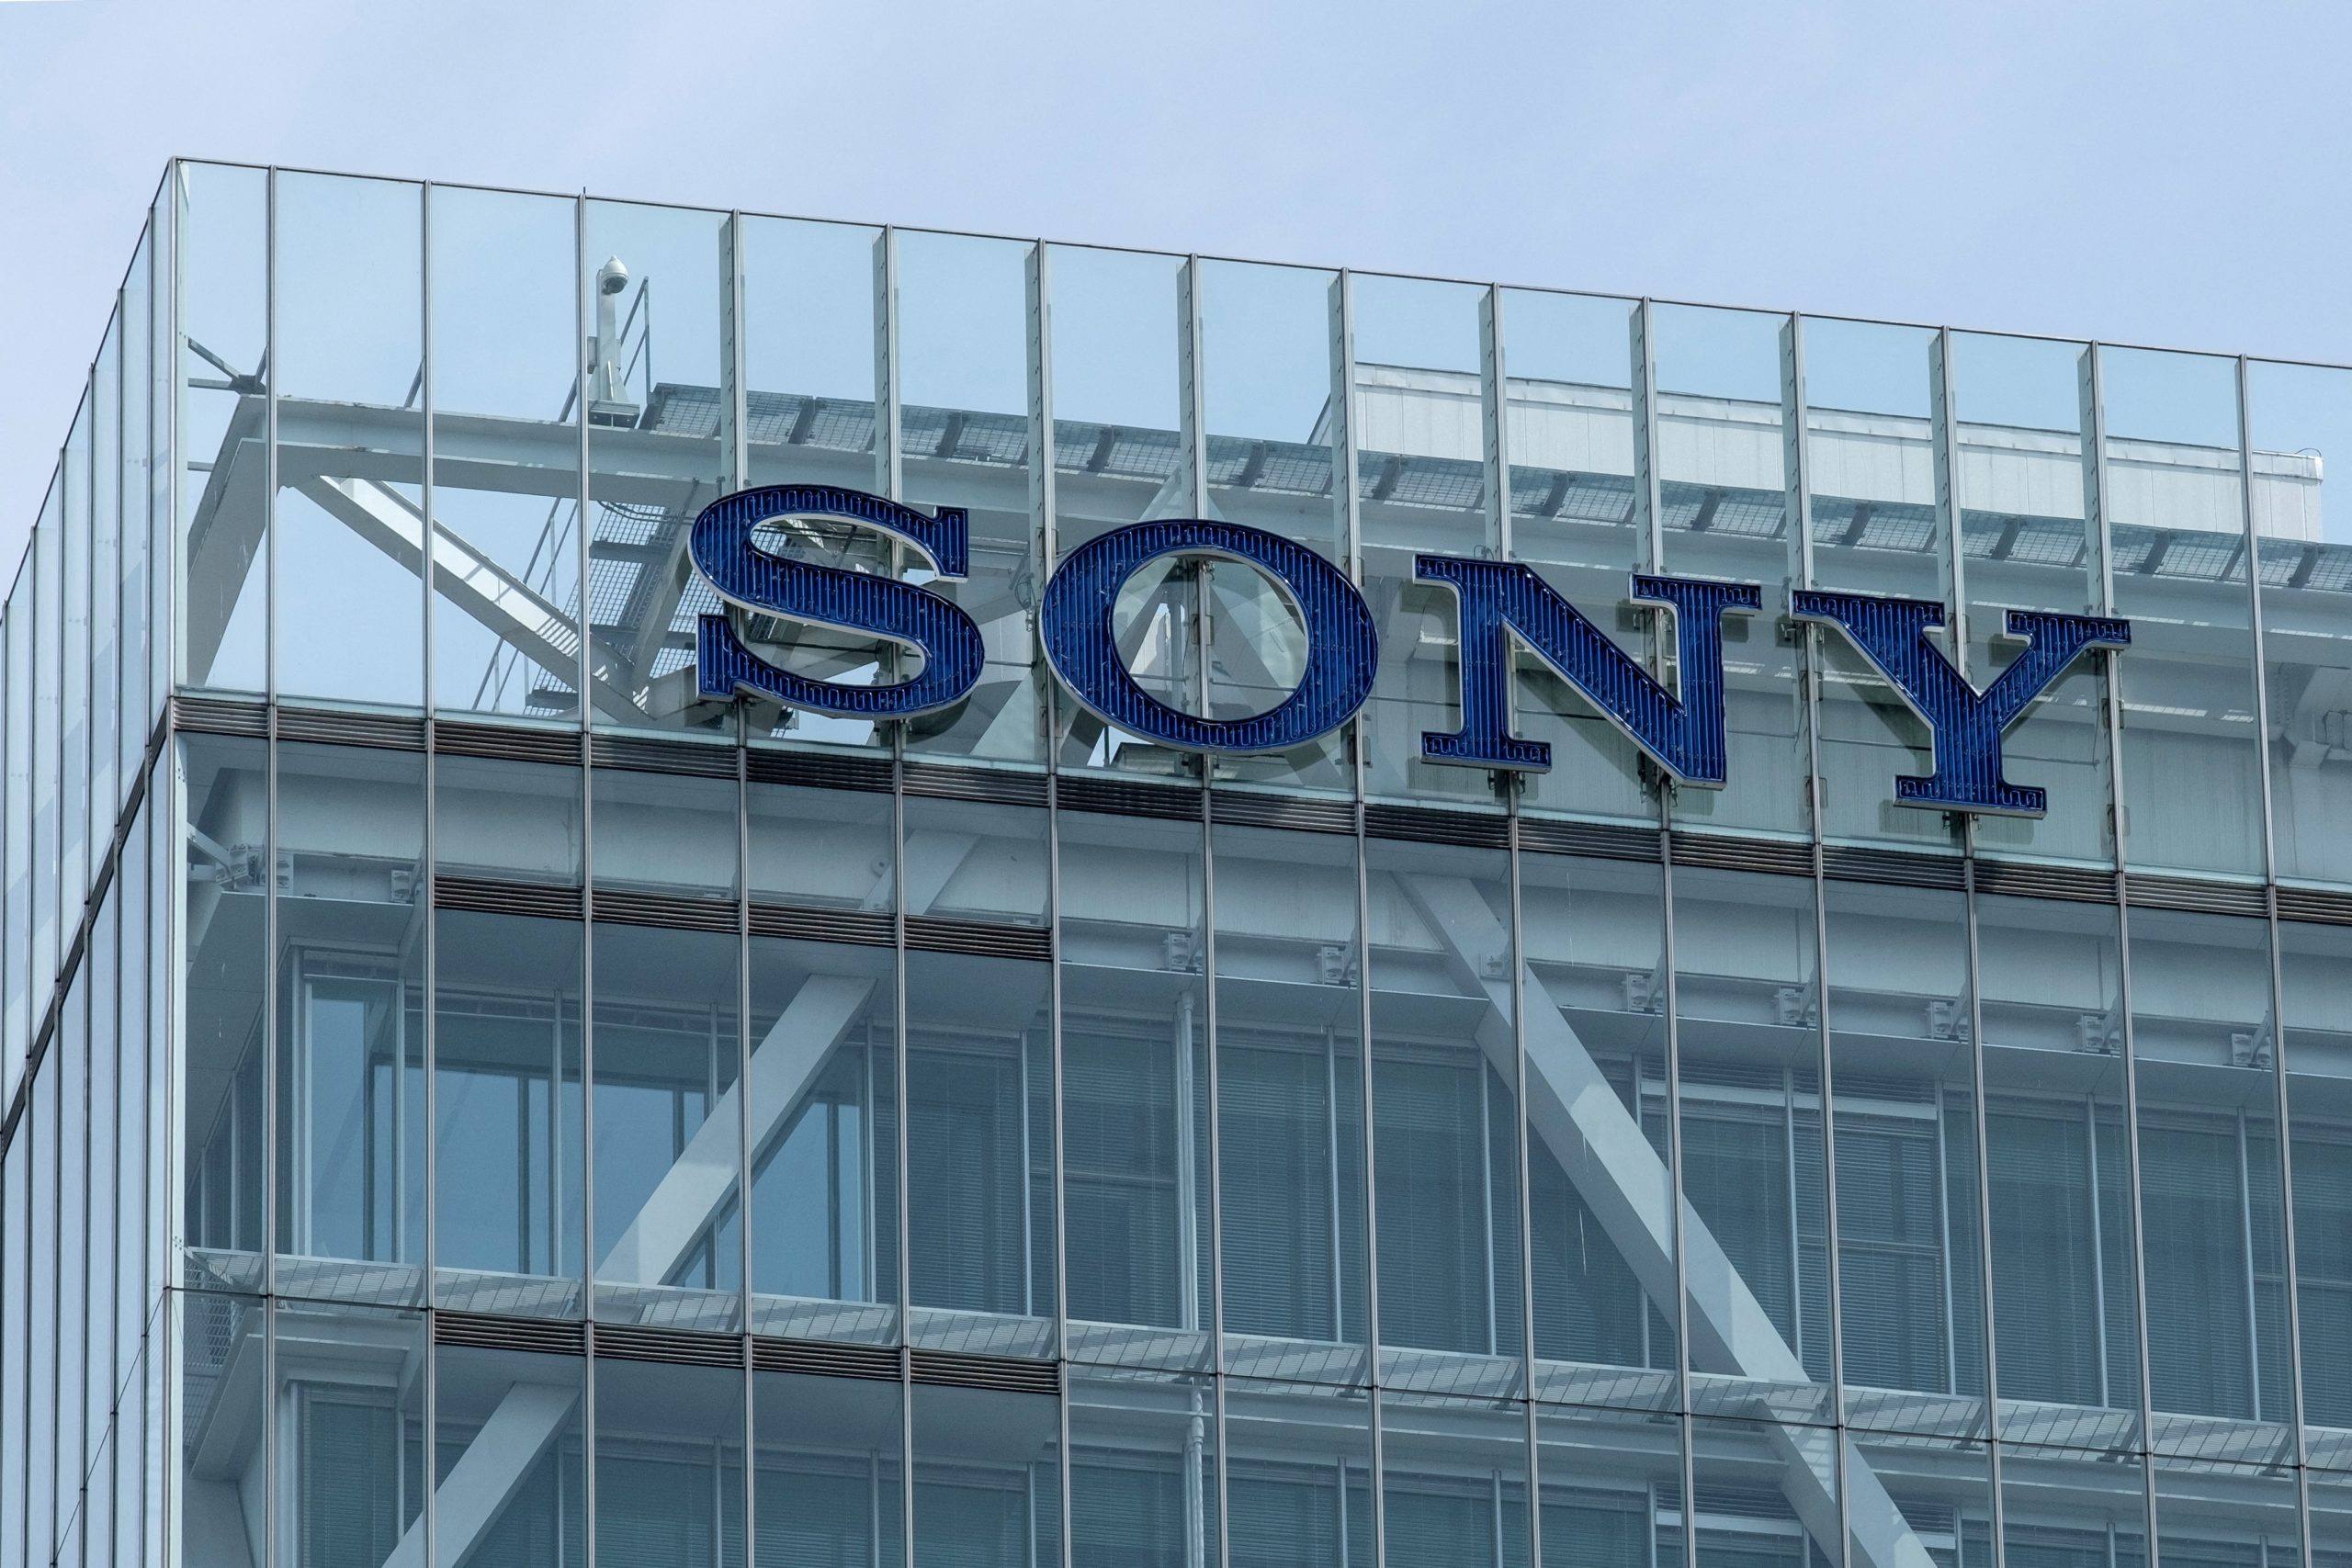 The Sony logo is displayed at the company's headquarters in Tokyo on April 28, 2021. (Photo by Yuki IWAMURA / AFP) (Photo by YUKI IWAMURA/AFP via Getty Images)